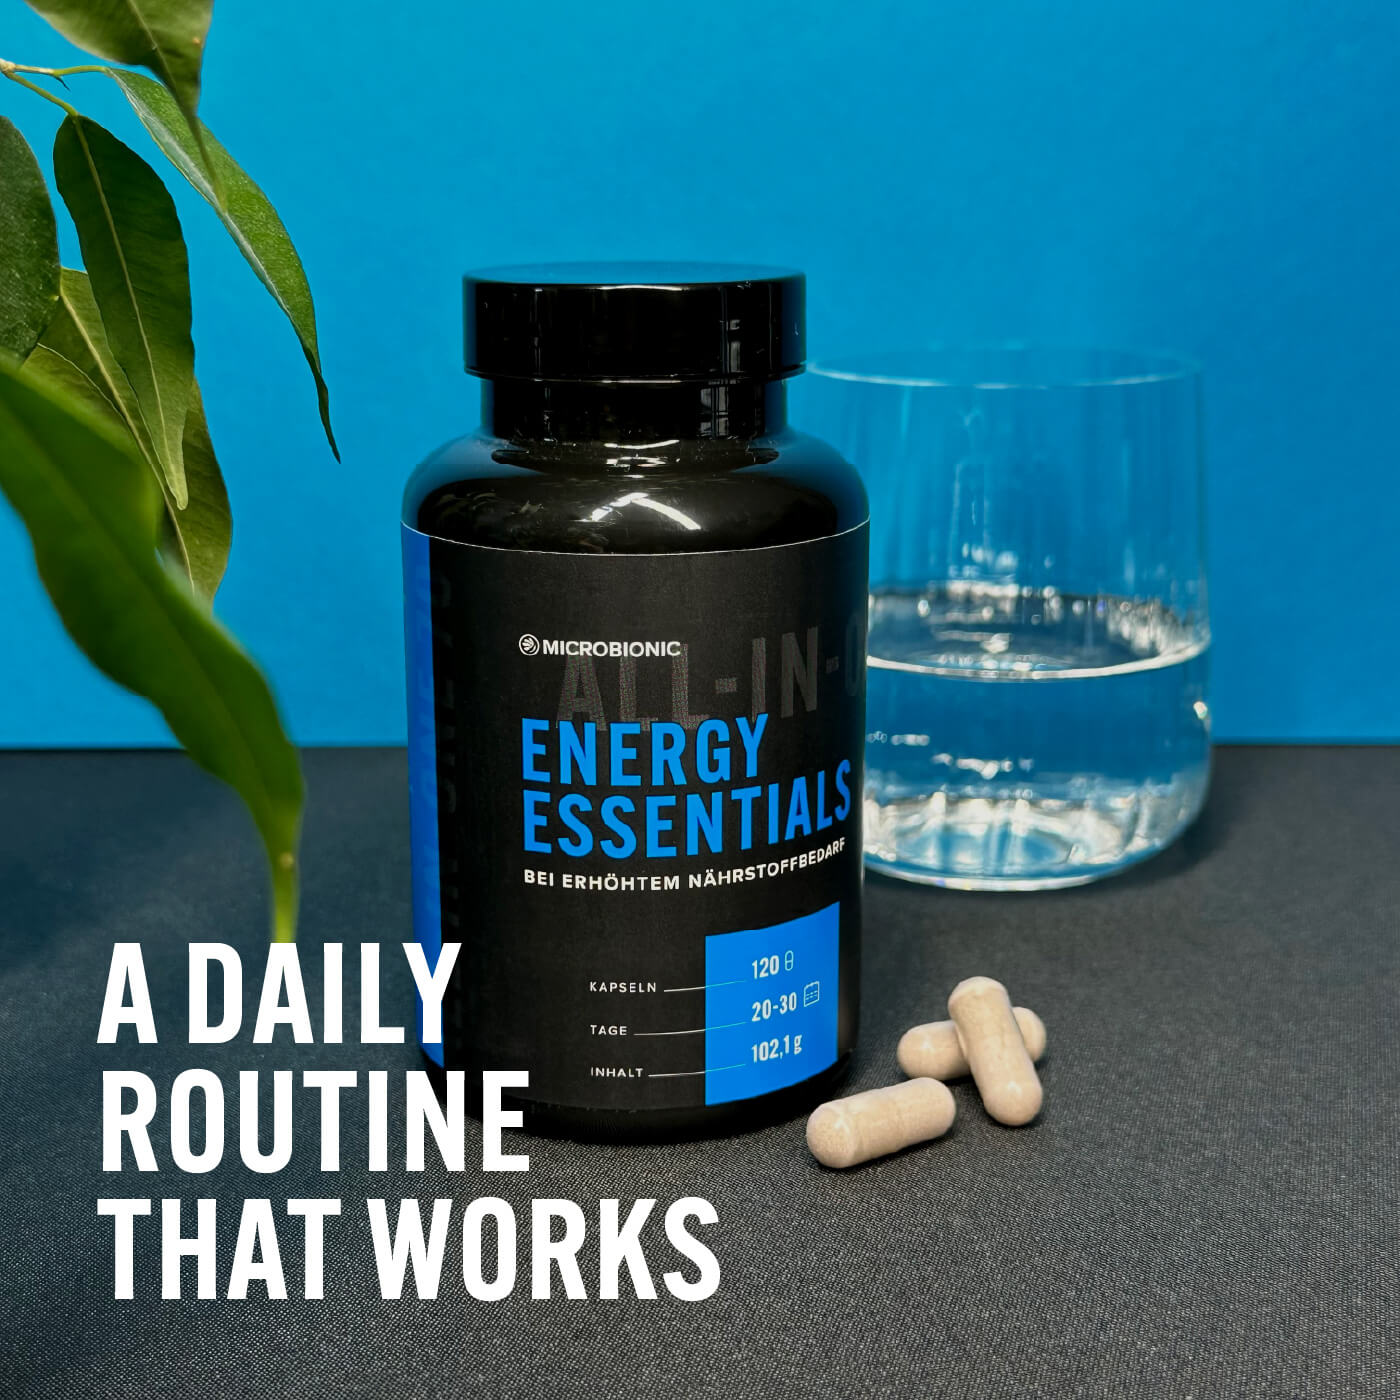 Energy Essentials – A Daily Routine That Works